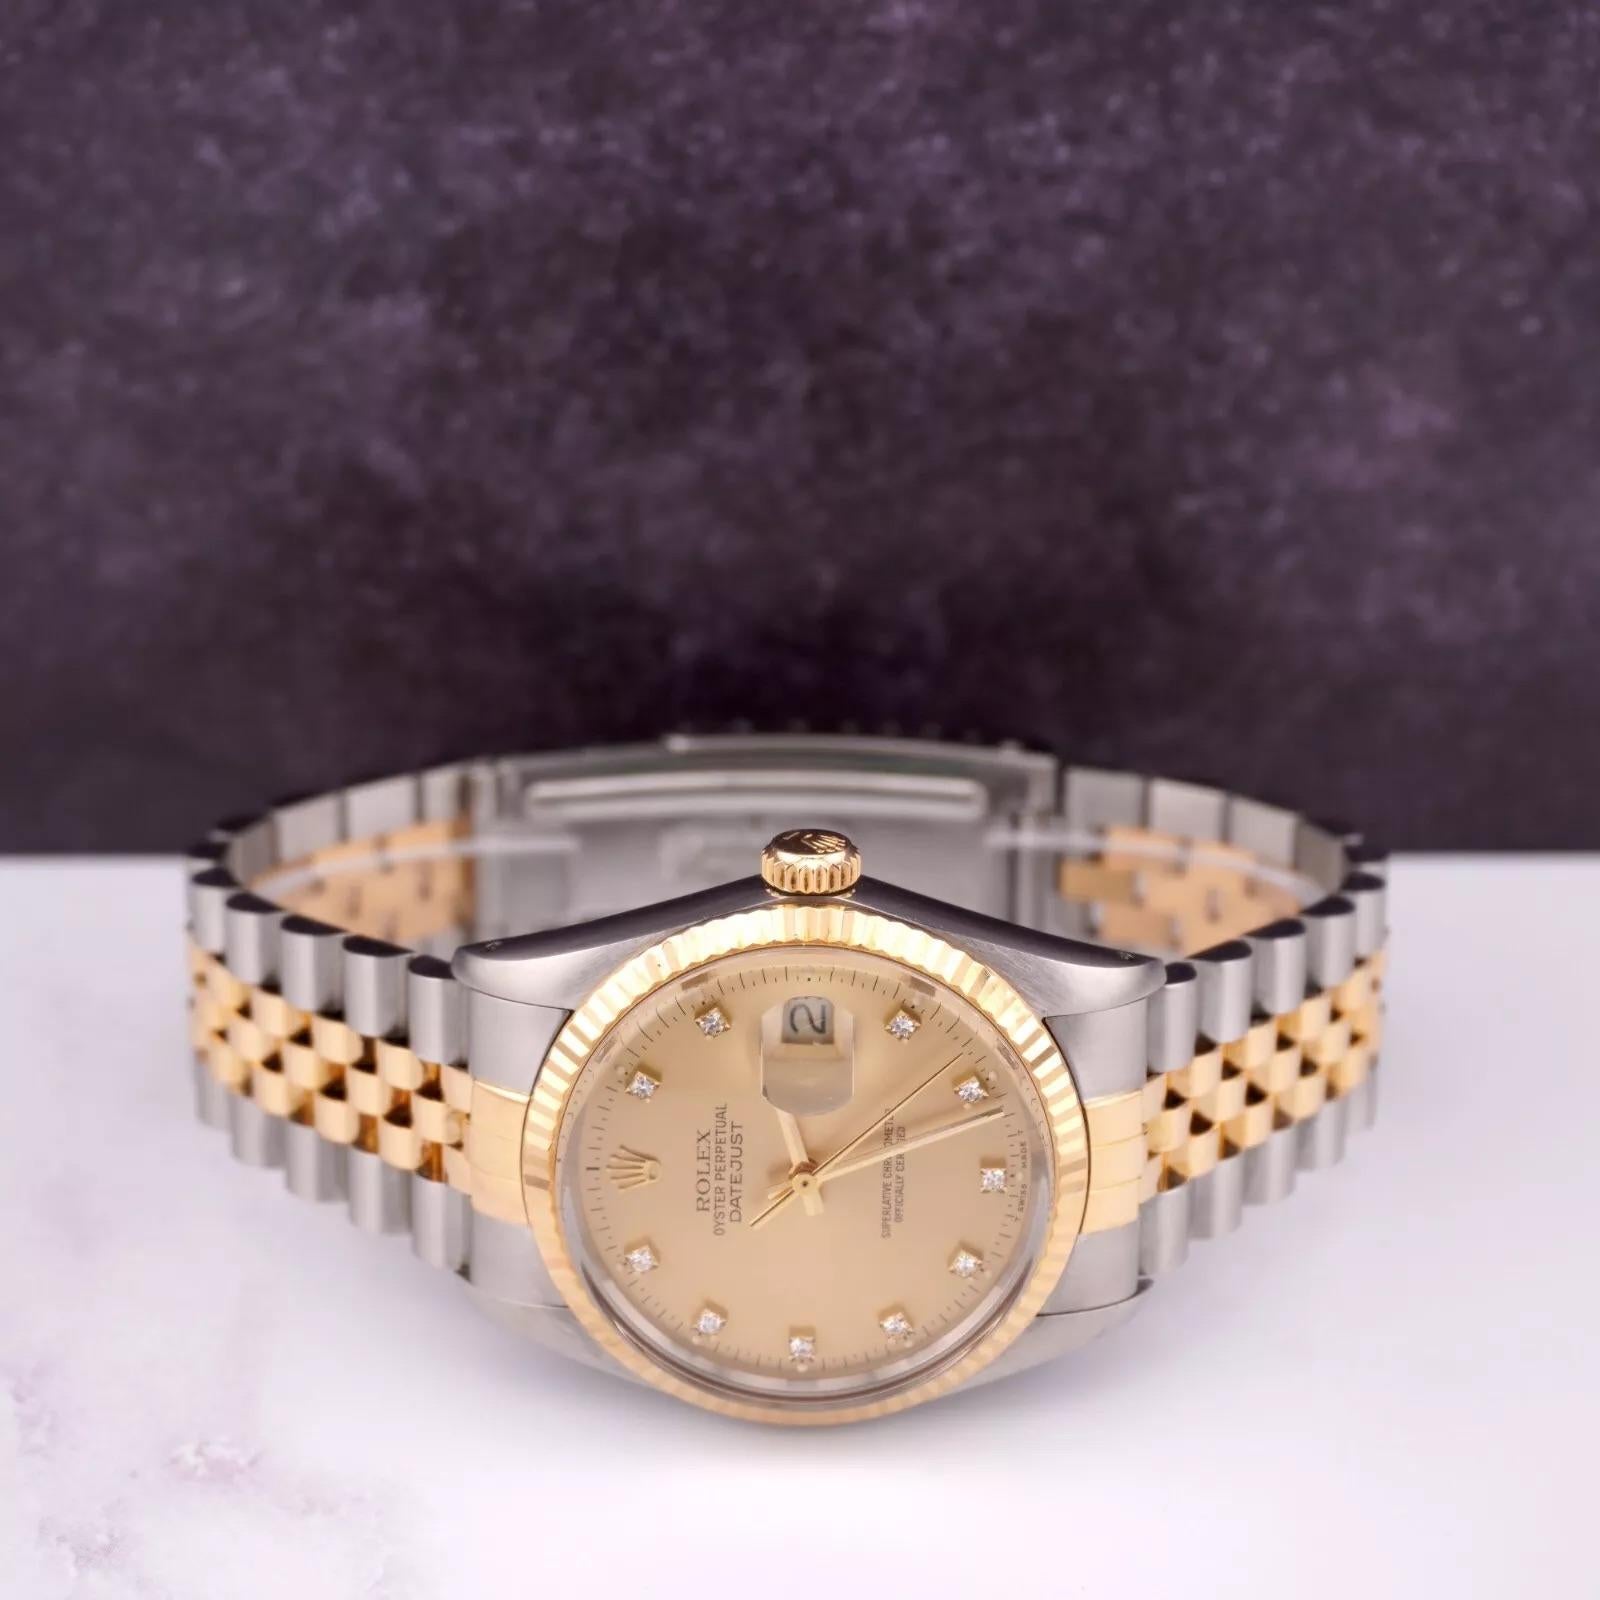 Rolex Mens Datejust 36mm 18k Yellow Gold & Steel Watch Gold Diamond Dial 16013 In Good Condition For Sale In Pleasanton, CA